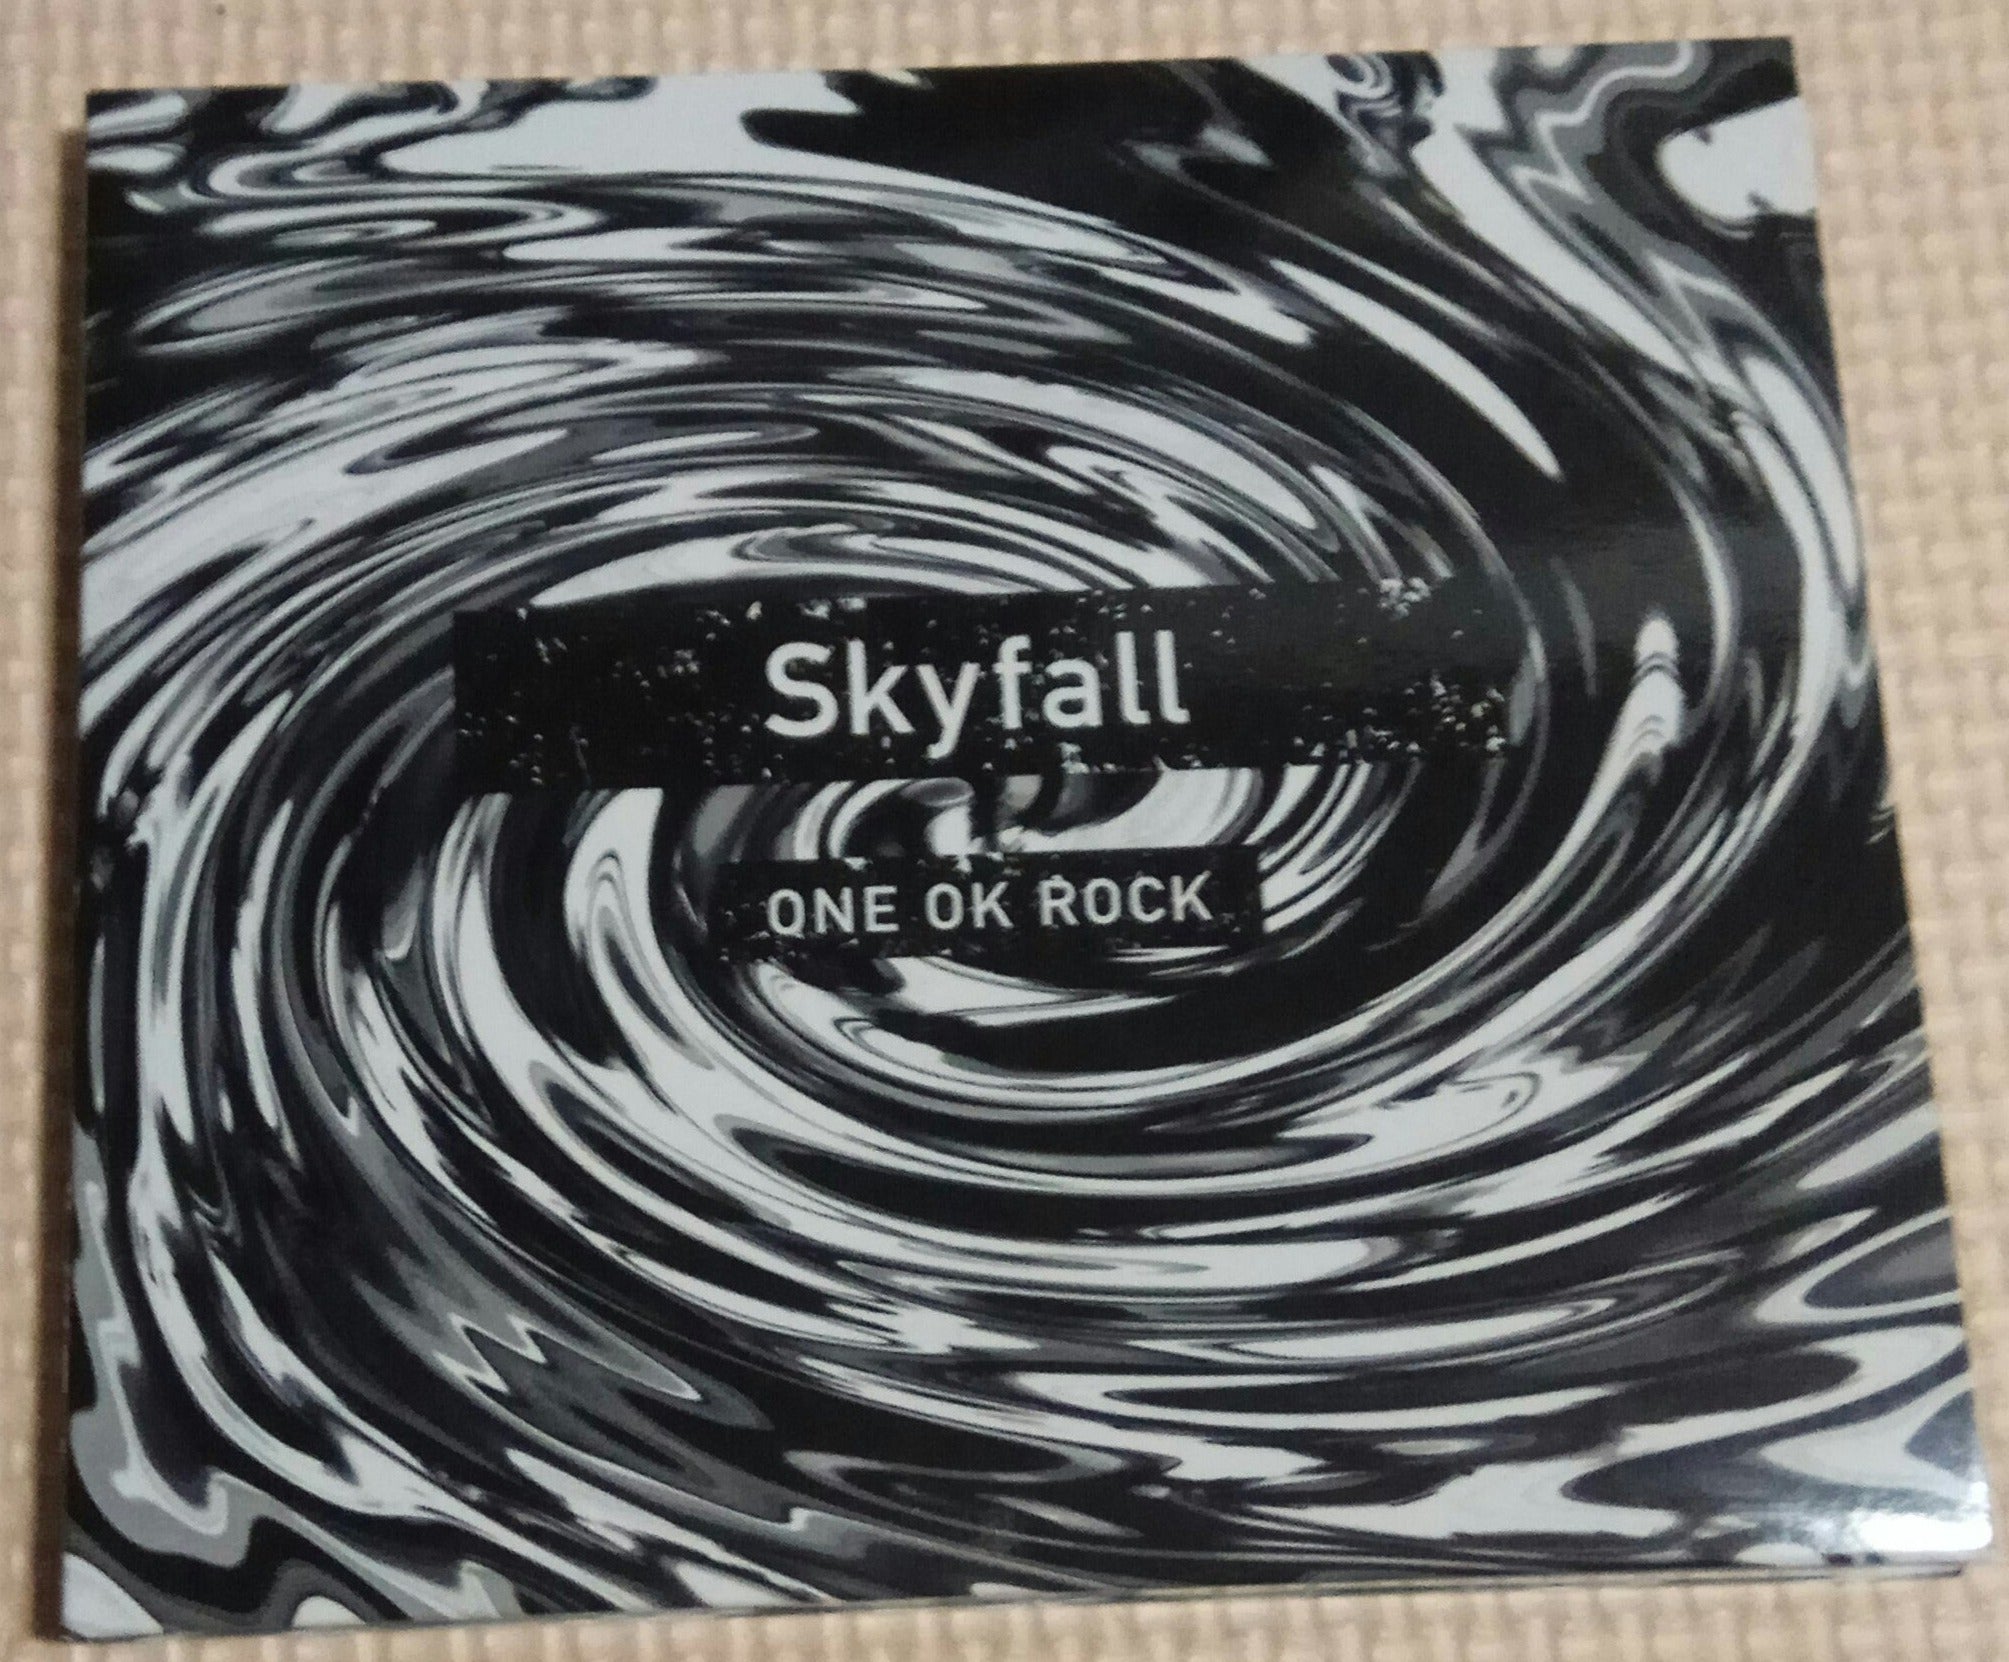 One Ok Rock - Skyfall Limited Tour Exclusive CD Single Japan Music